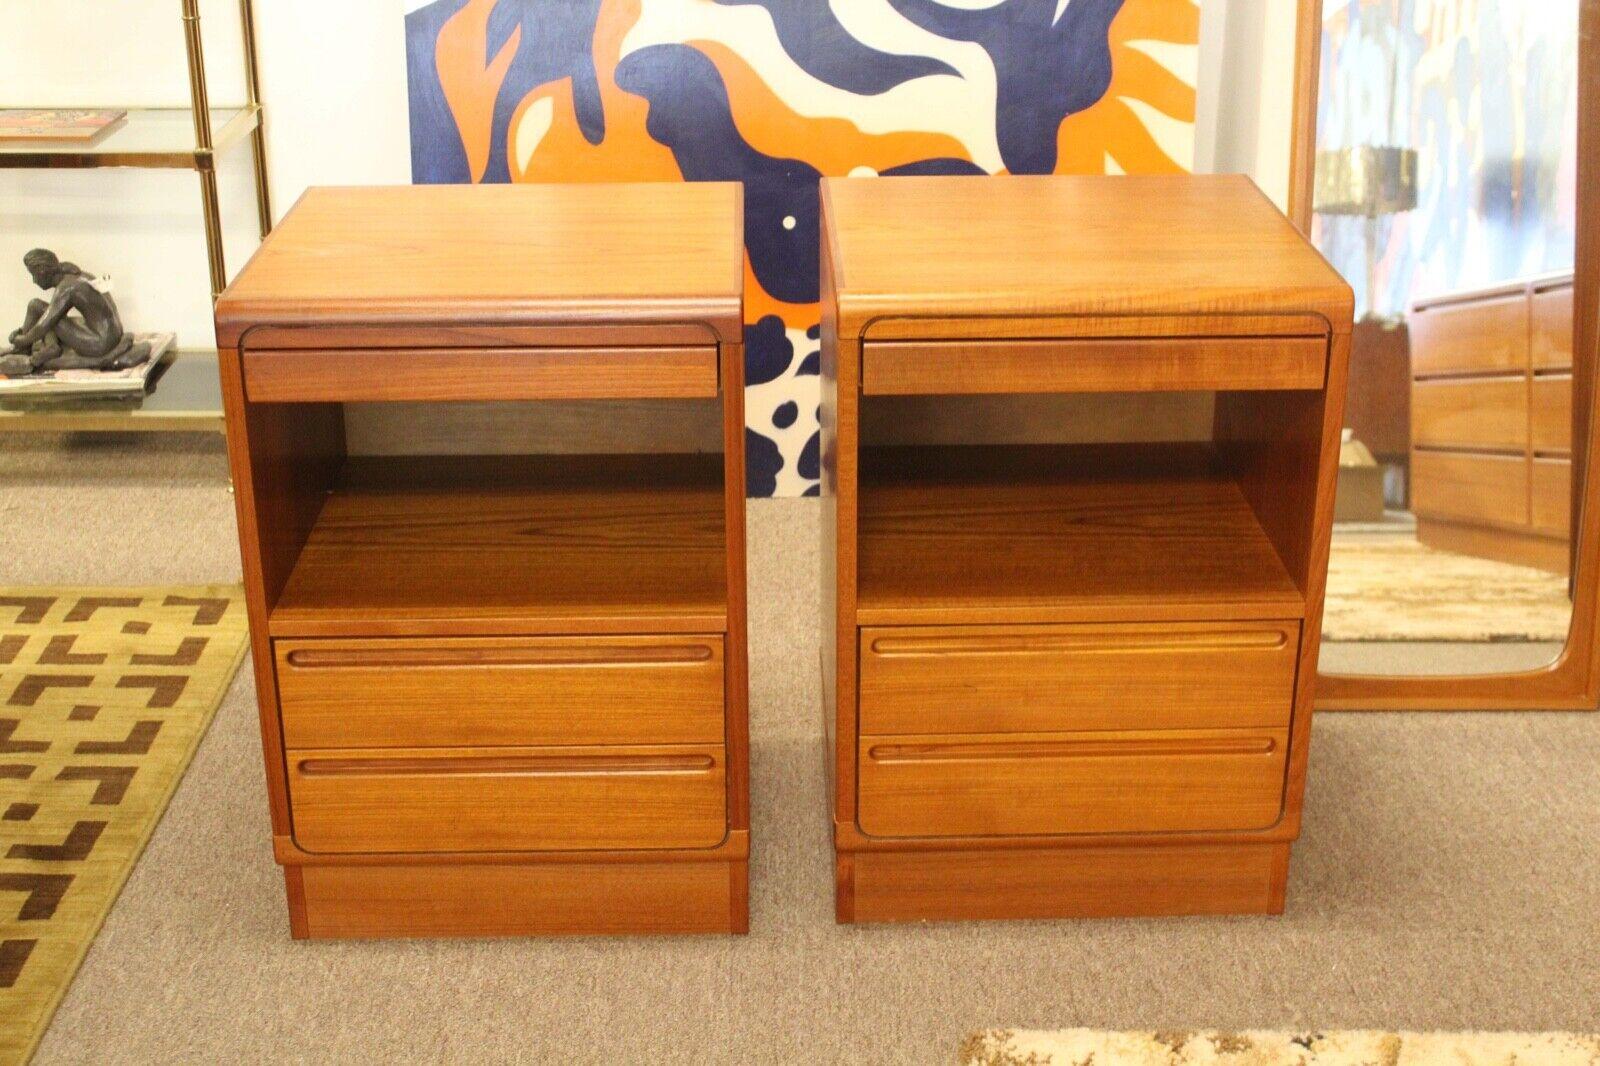 Le Shoppe Too presents this beautiful teak danish bedroom set in very good condition. Dimensions: Nightstands: 19.5